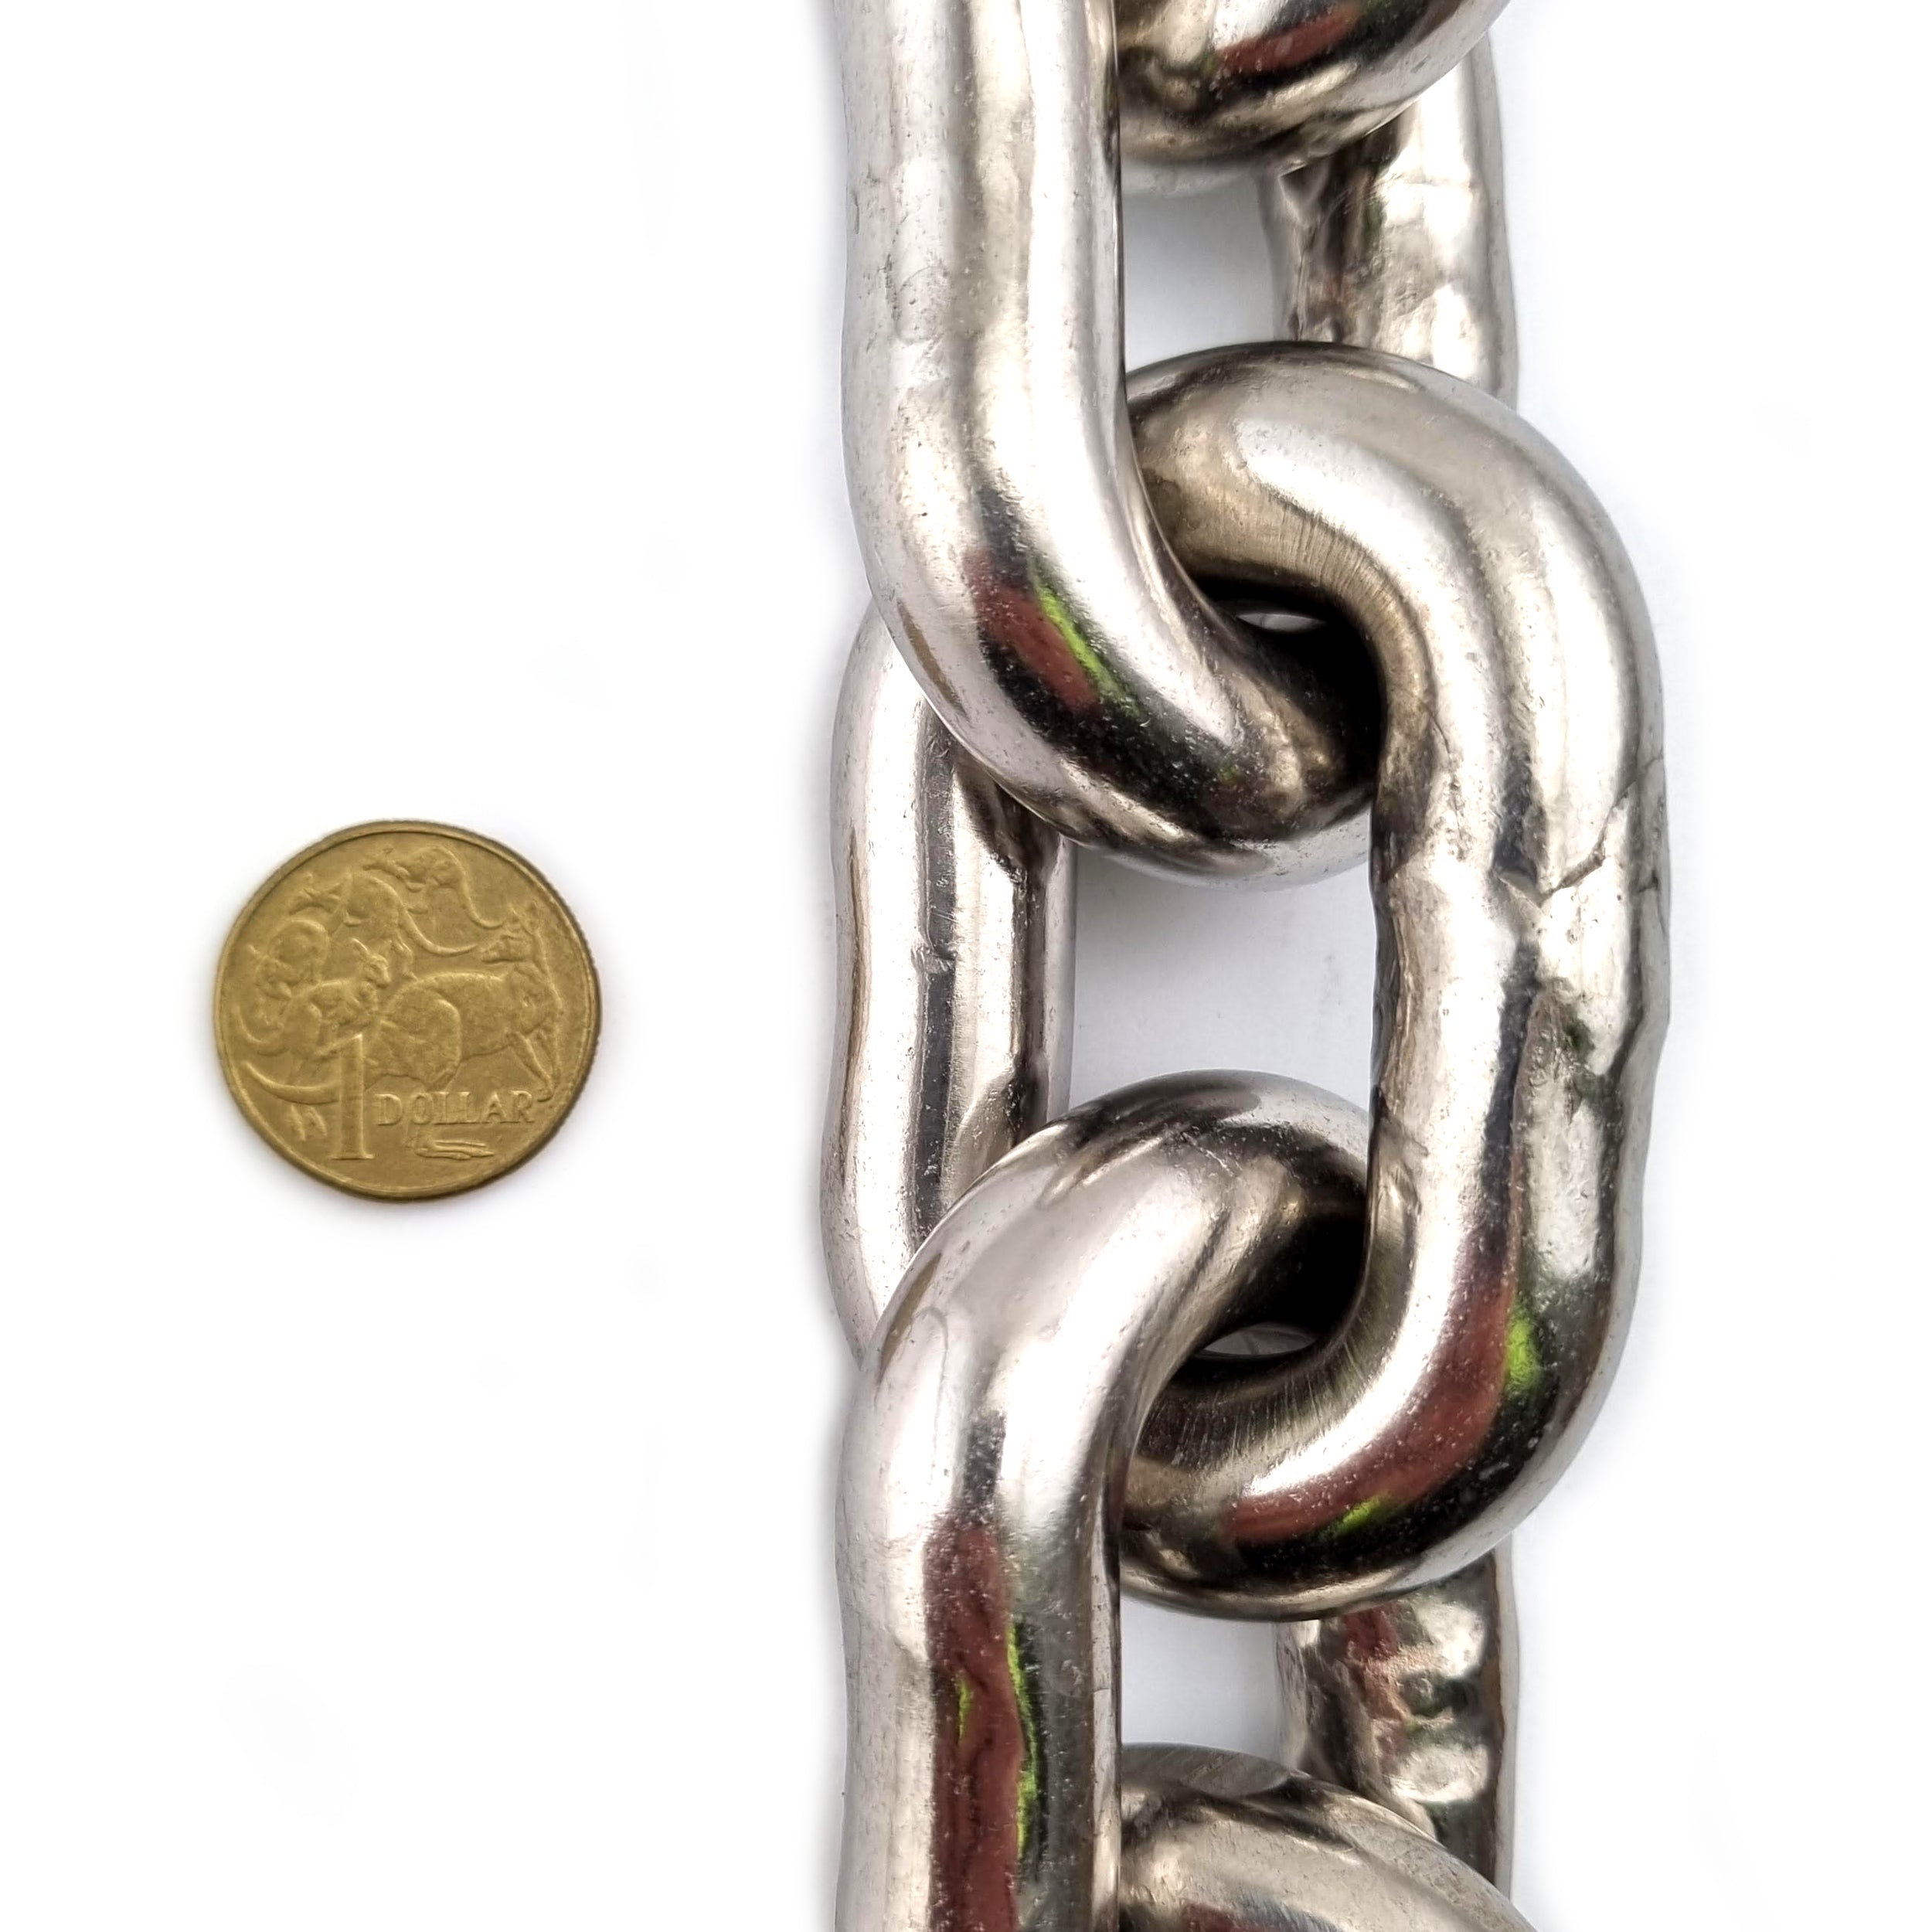  short link chain, 16mm stainless steel, welded